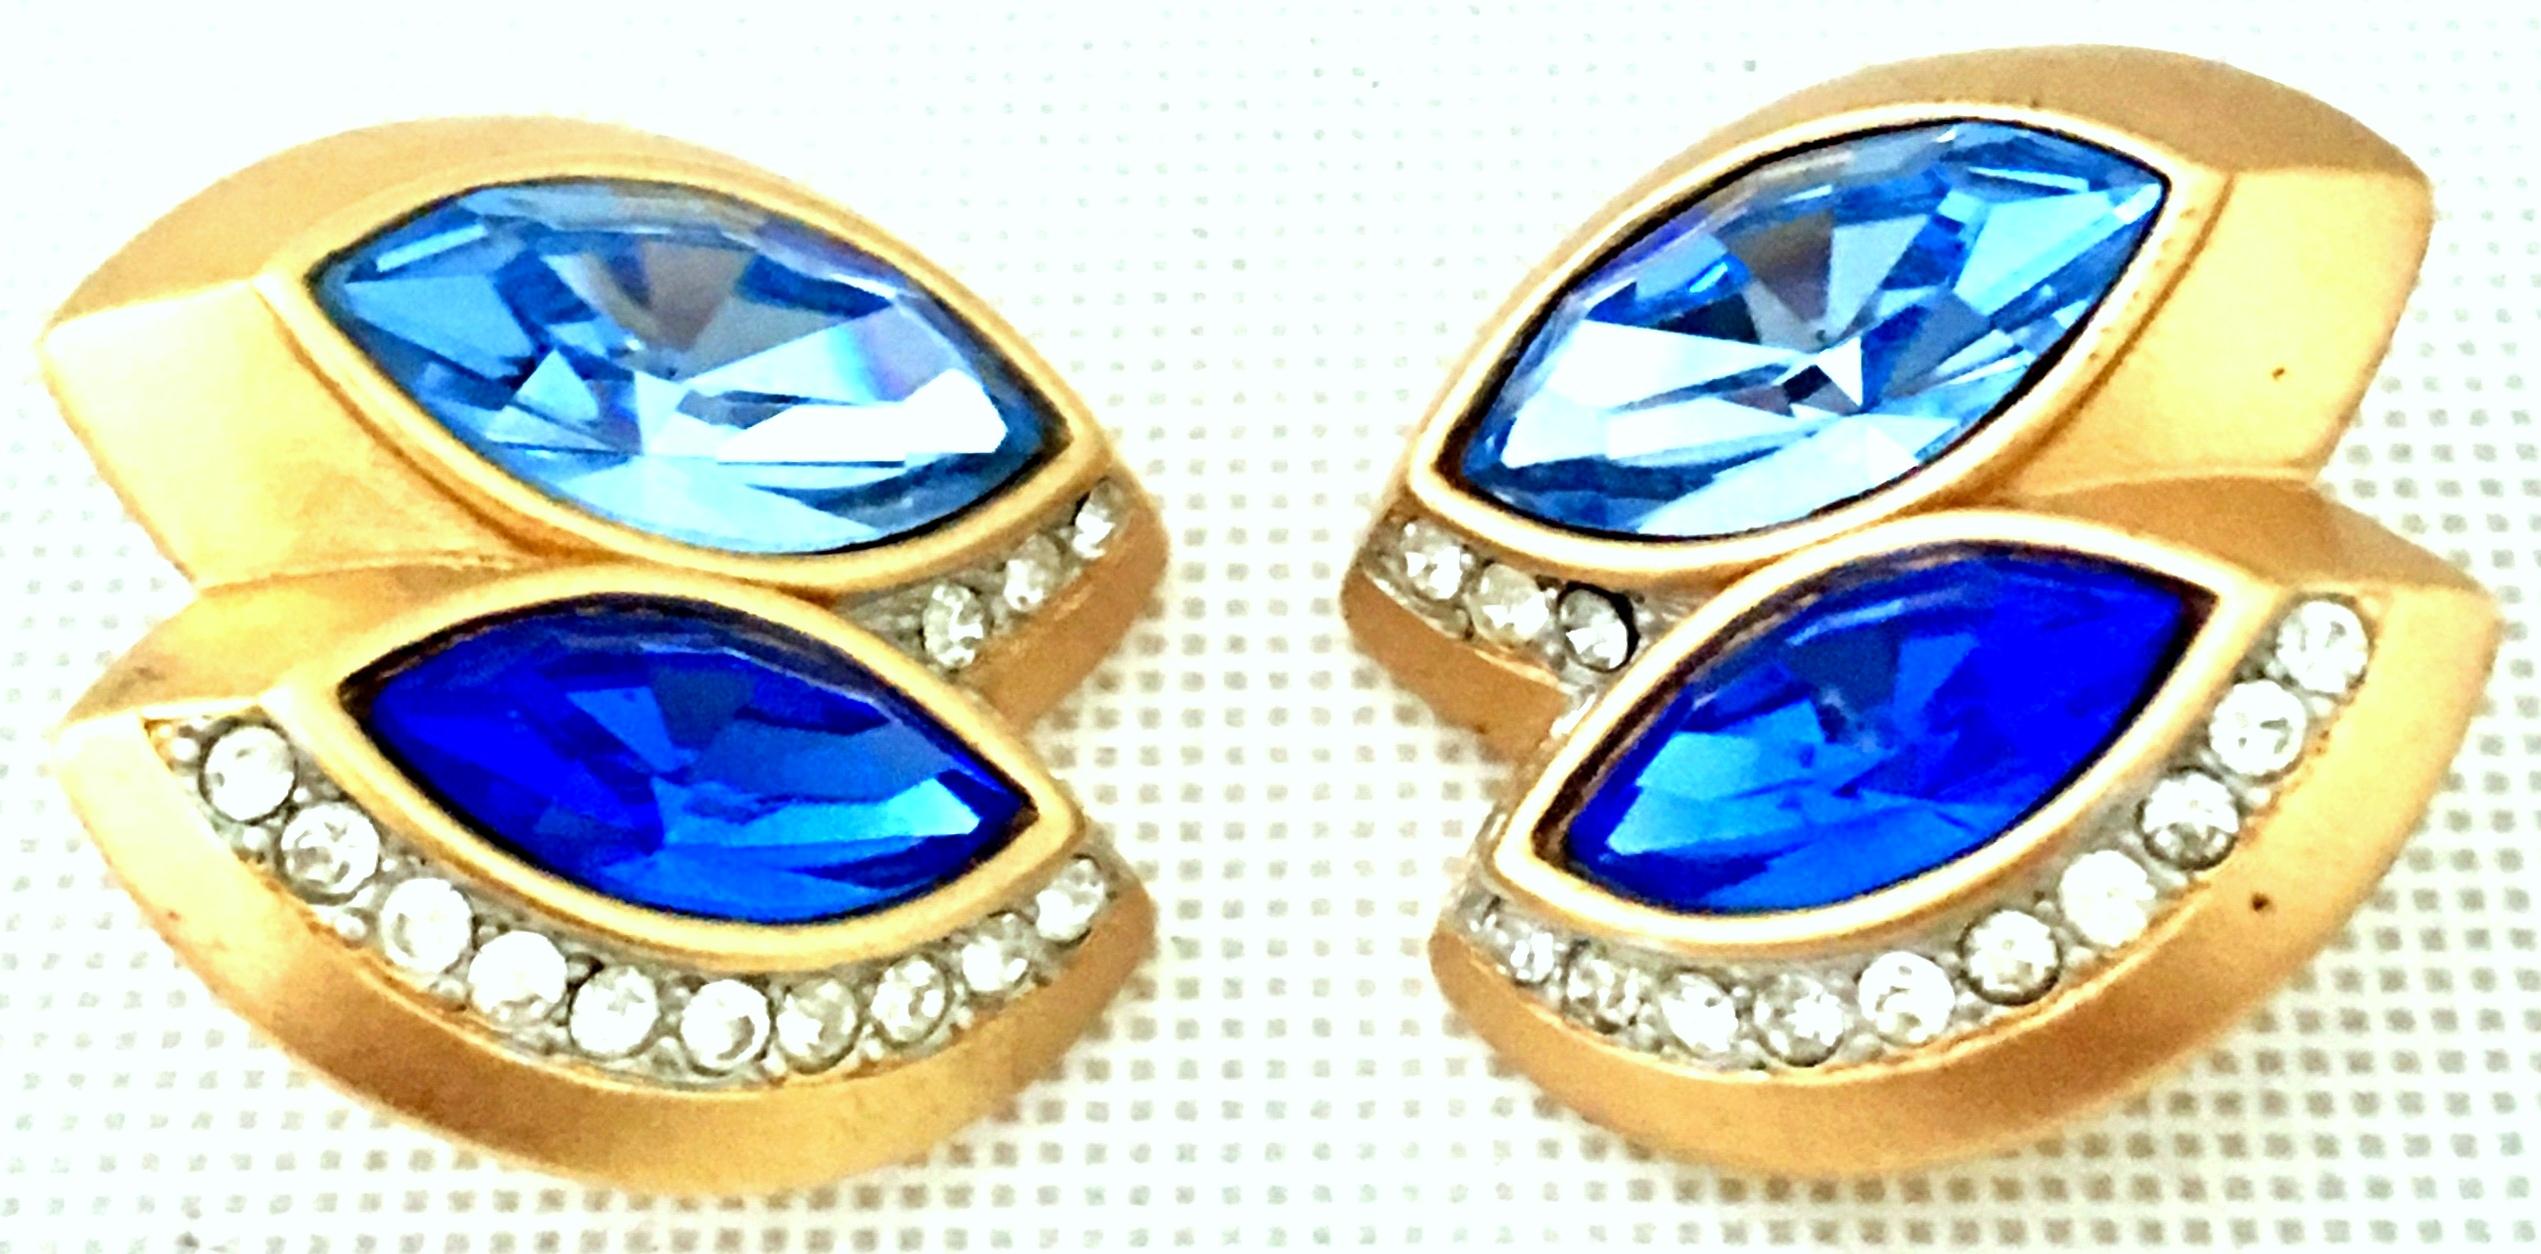 20th Century Pair Of Gold & Sapphire Blue Swarovski Crystal Earrings By, Monet 1